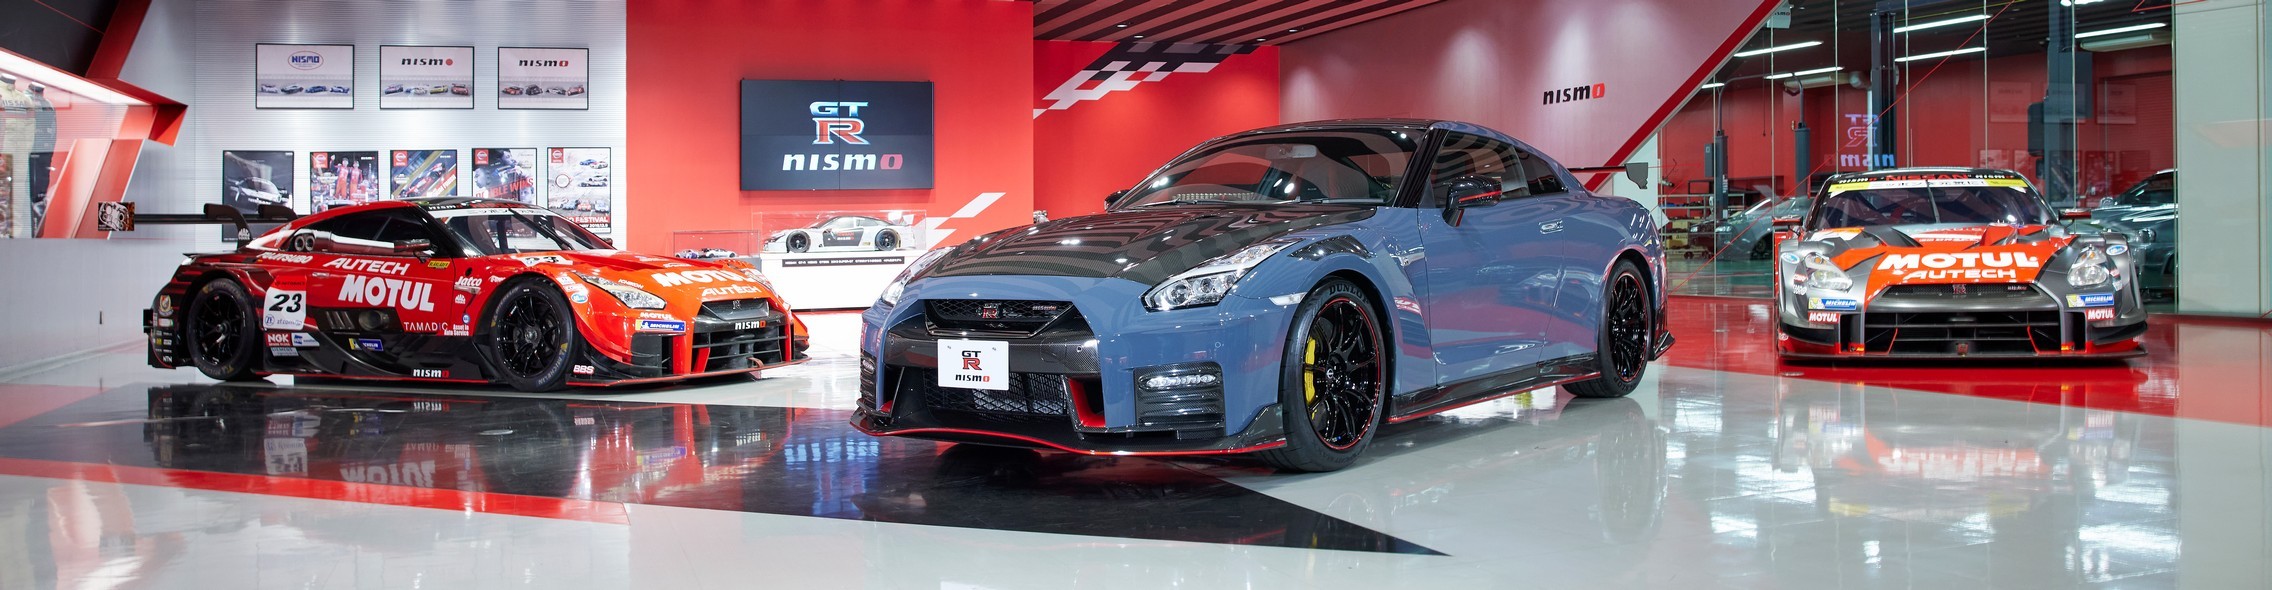 2022 Nissan GT-R Nismo Sold Out Like Hot Cake in Sparta - autoevolution